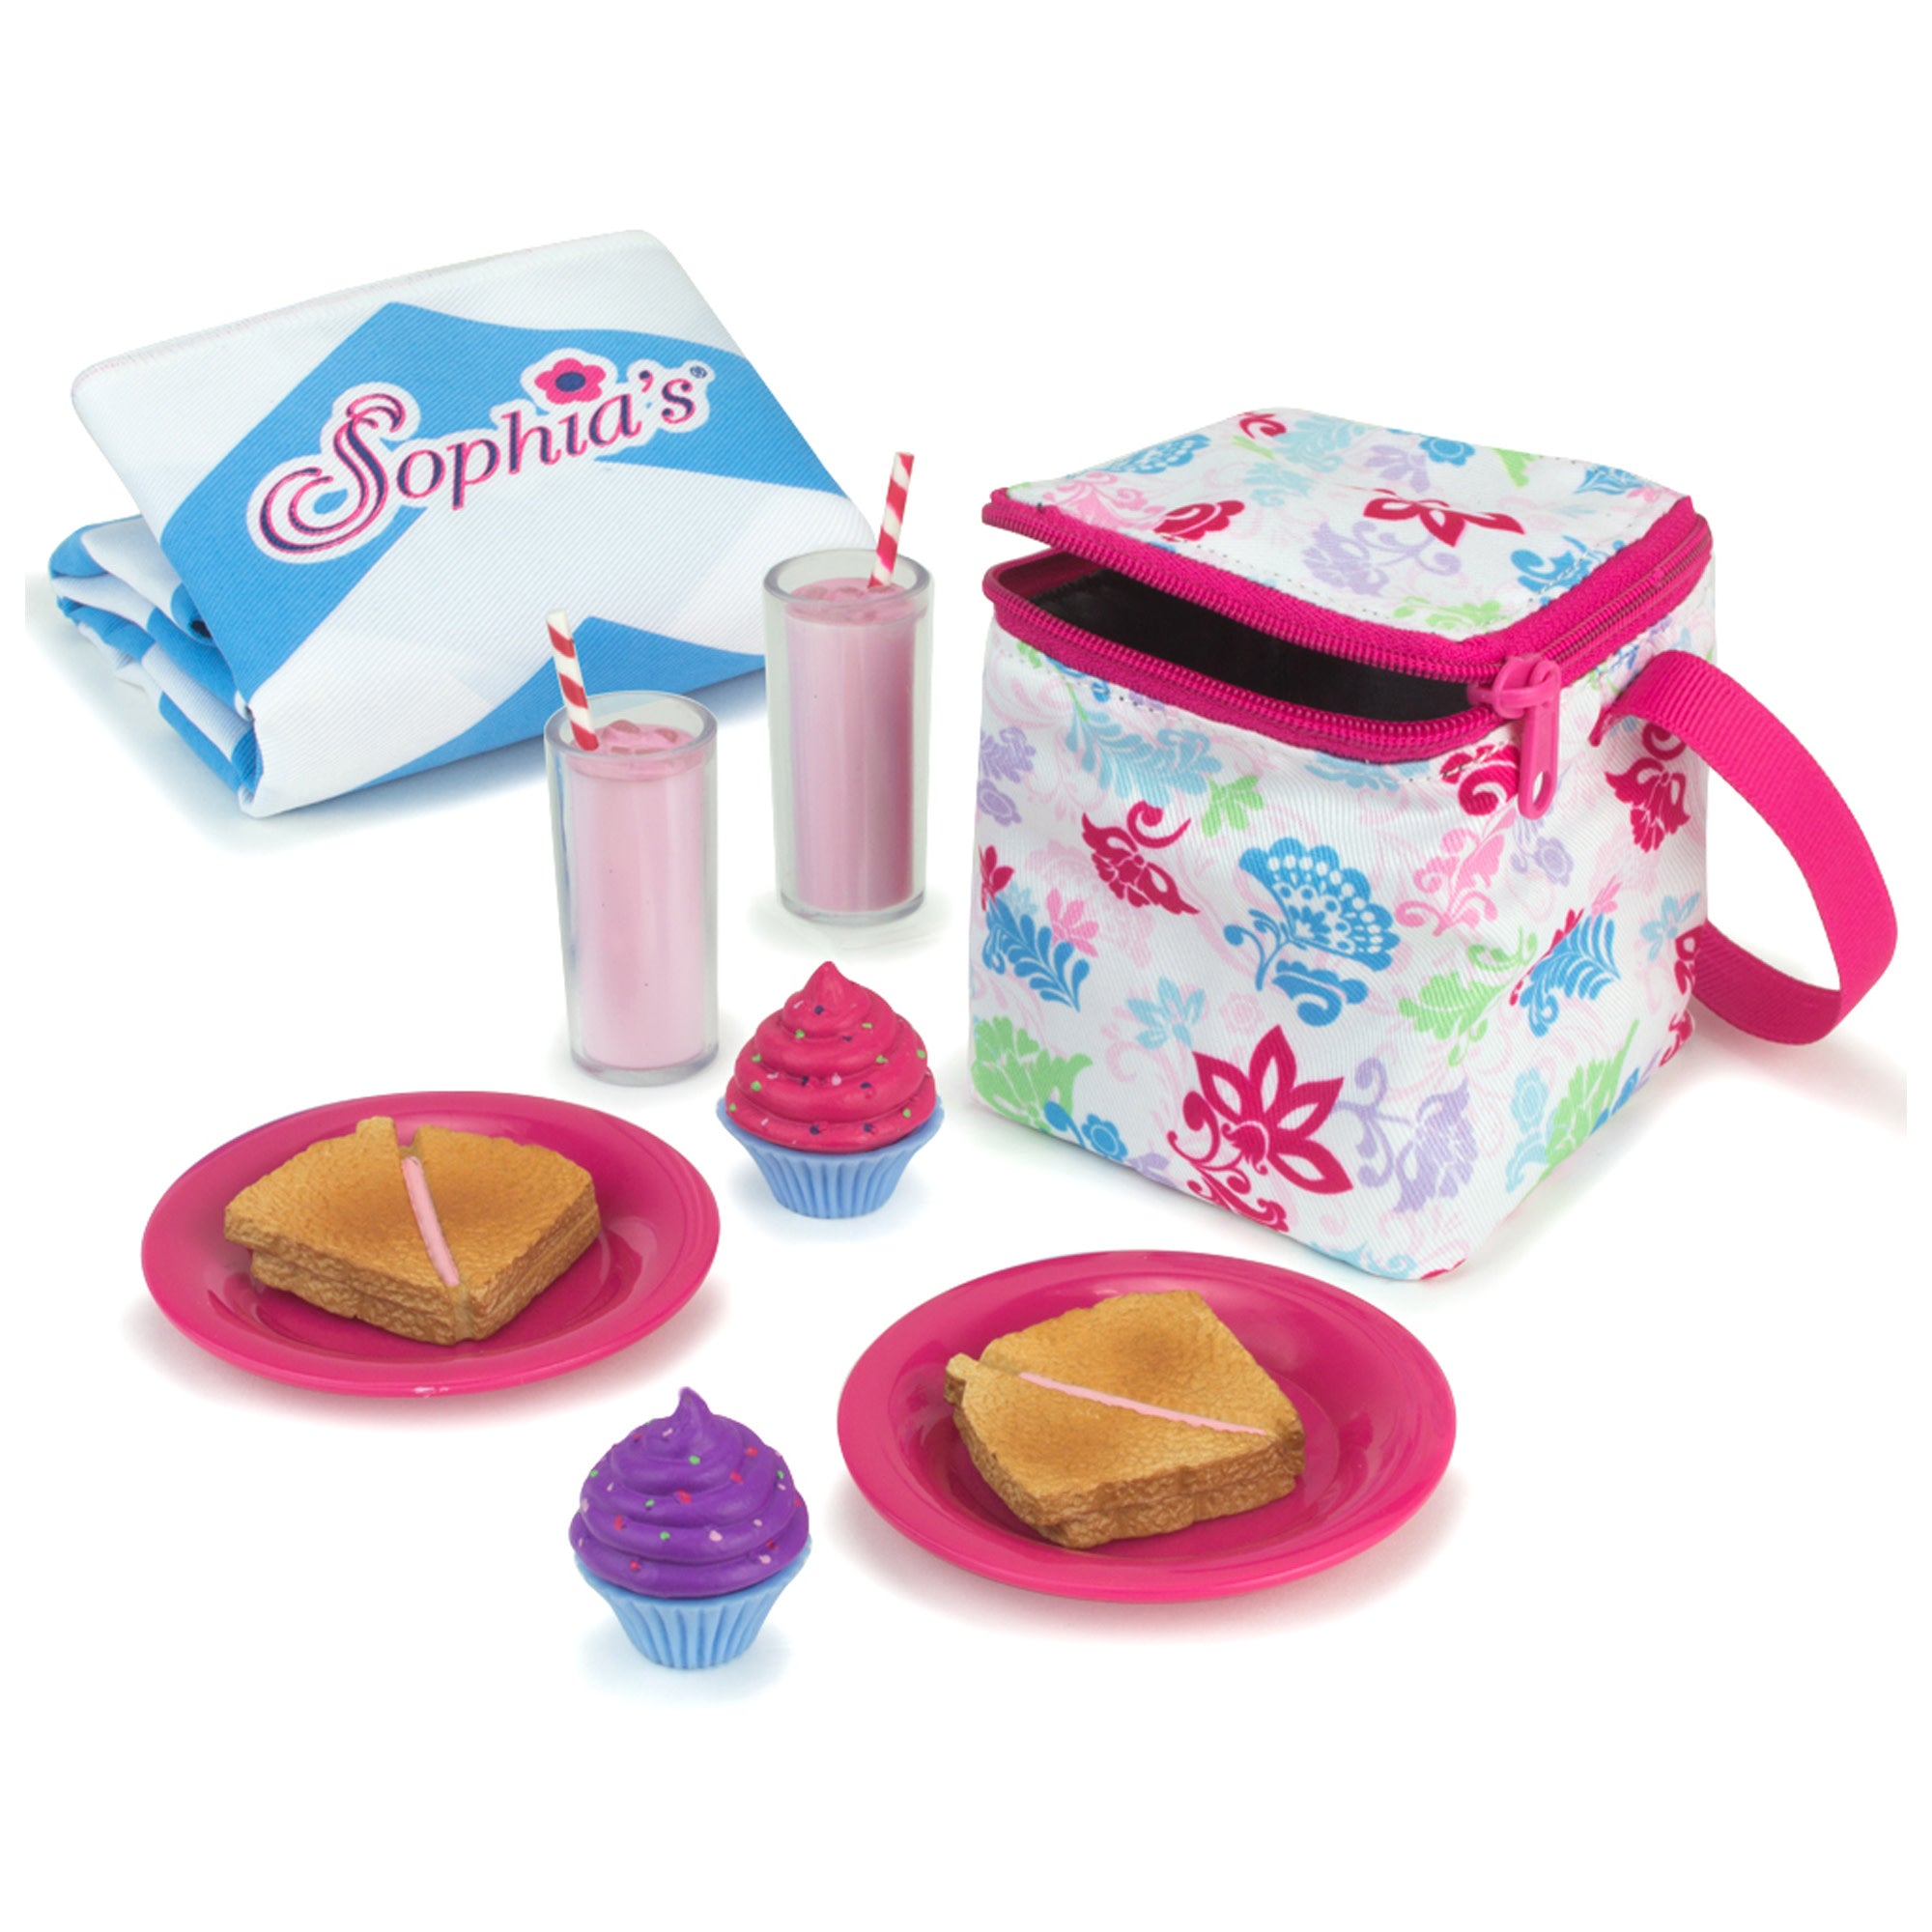 Sophia’s Picnic Lunch Set with Food and Cooler for 18" Dolls